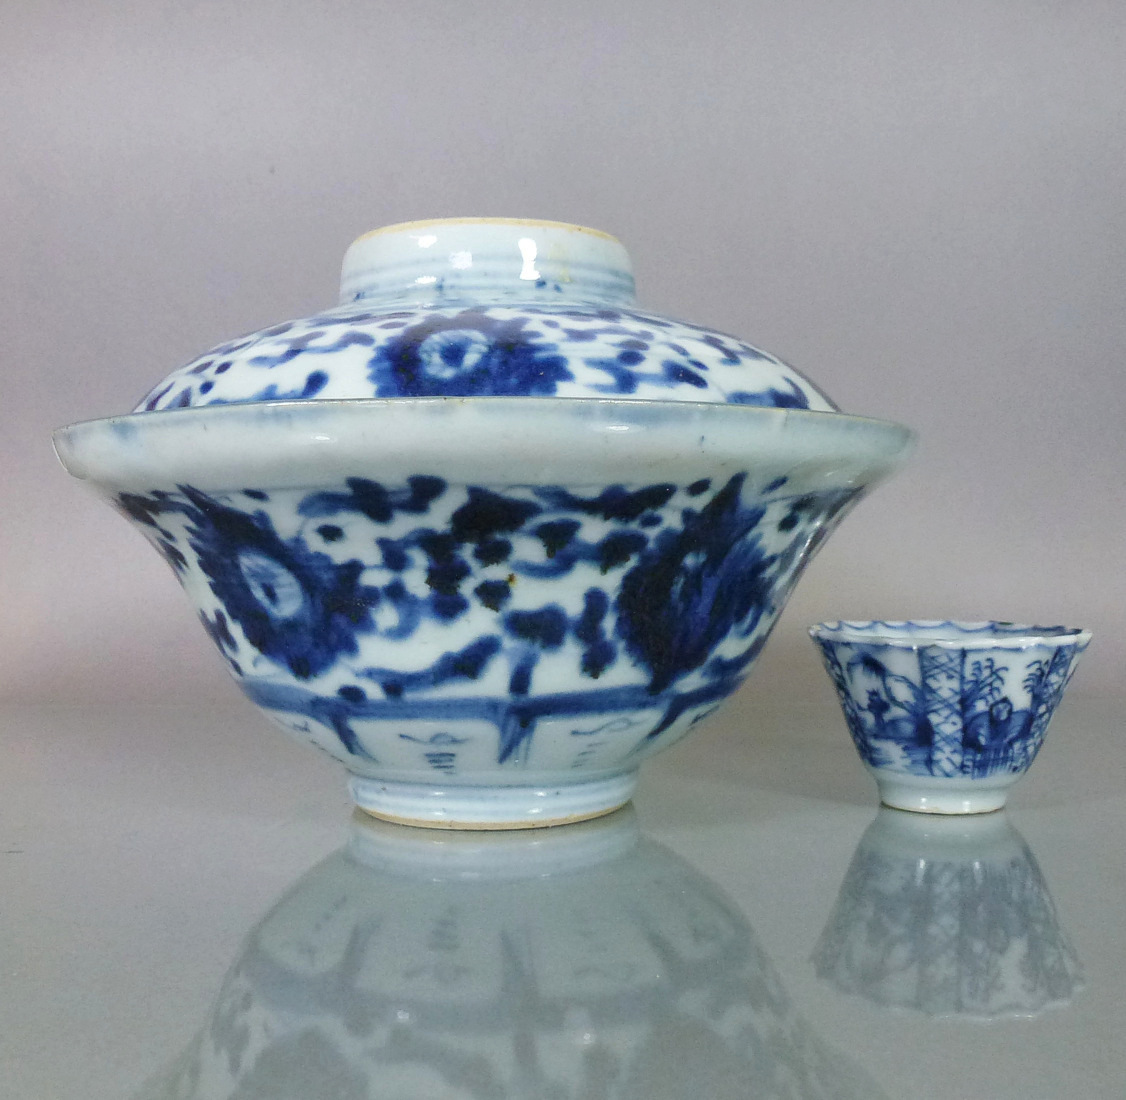 Chinese 18th C. Ogee Bowl & Cover – Chrysanthemum